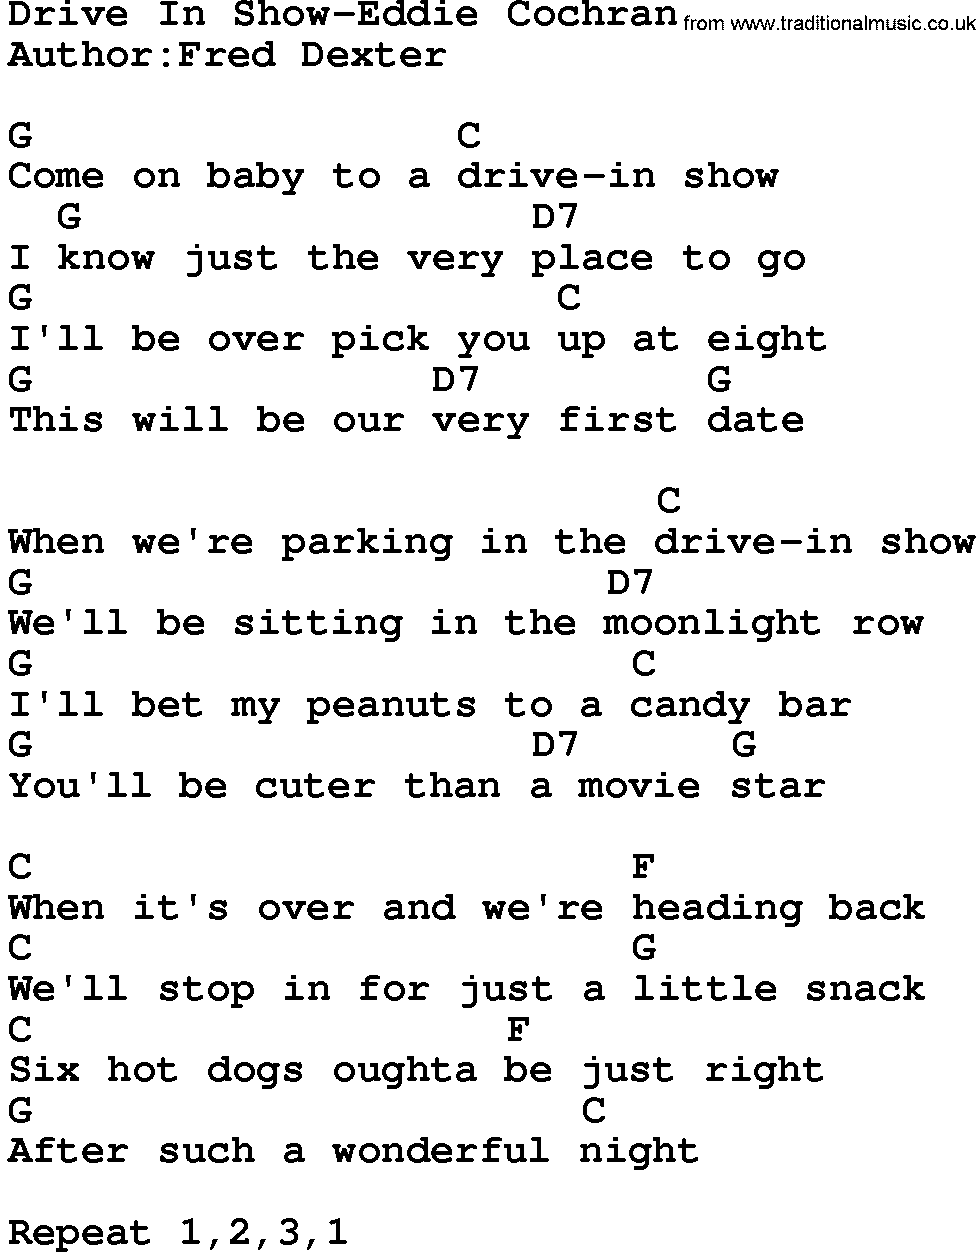 Country music song: Drive In Show-Eddie Cochran lyrics and chords